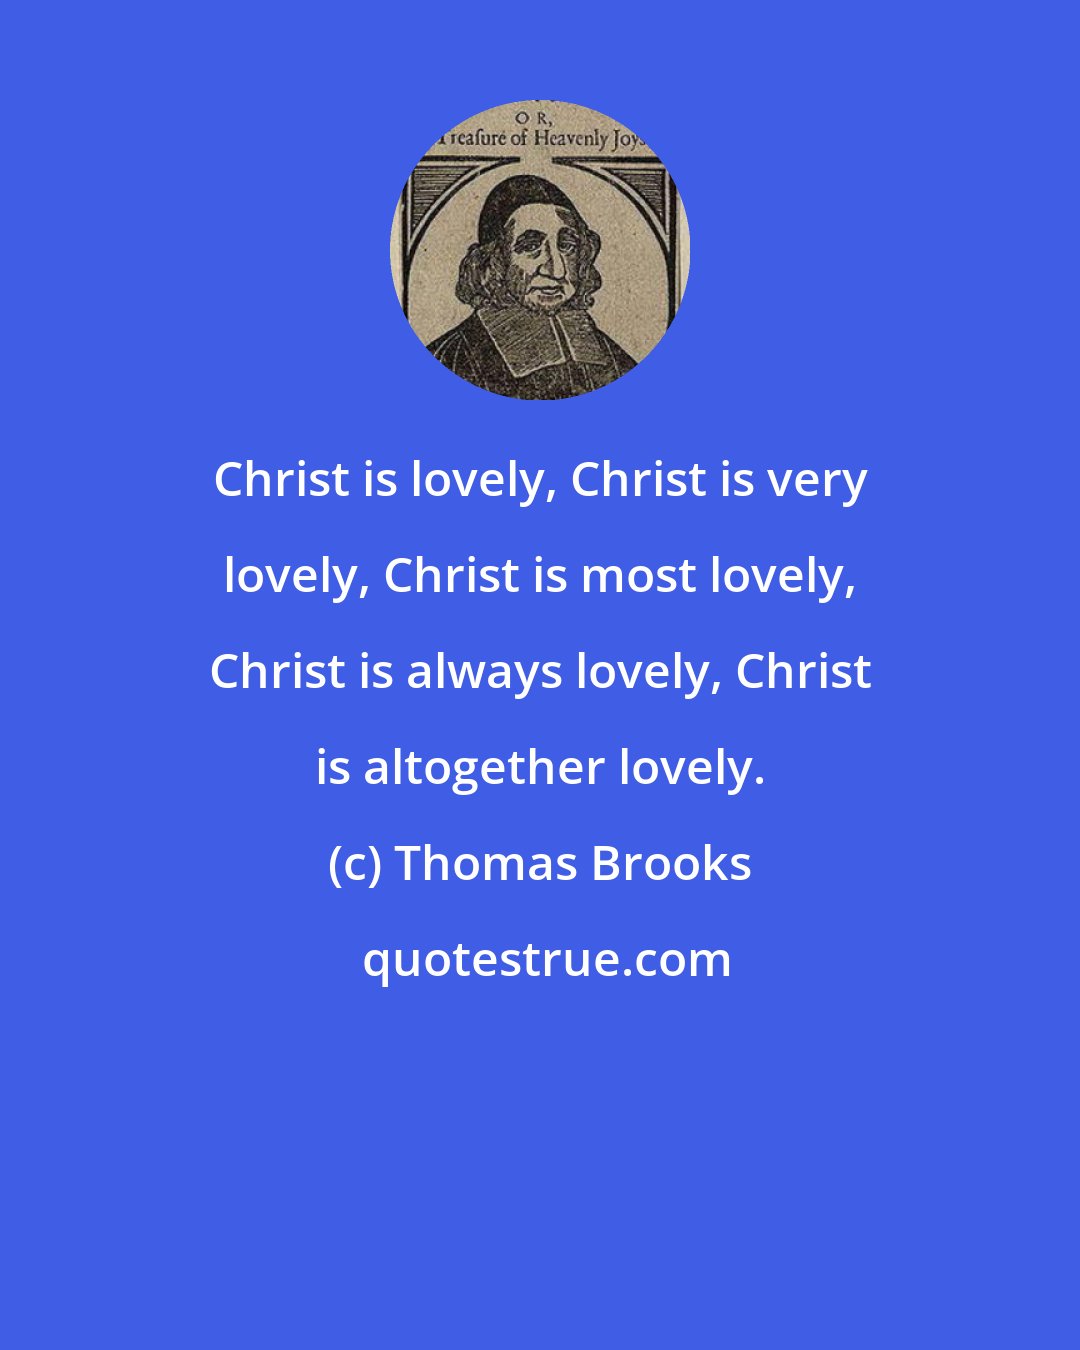 Thomas Brooks: Christ is lovely, Christ is very lovely, Christ is most lovely, Christ is always lovely, Christ is altogether lovely.